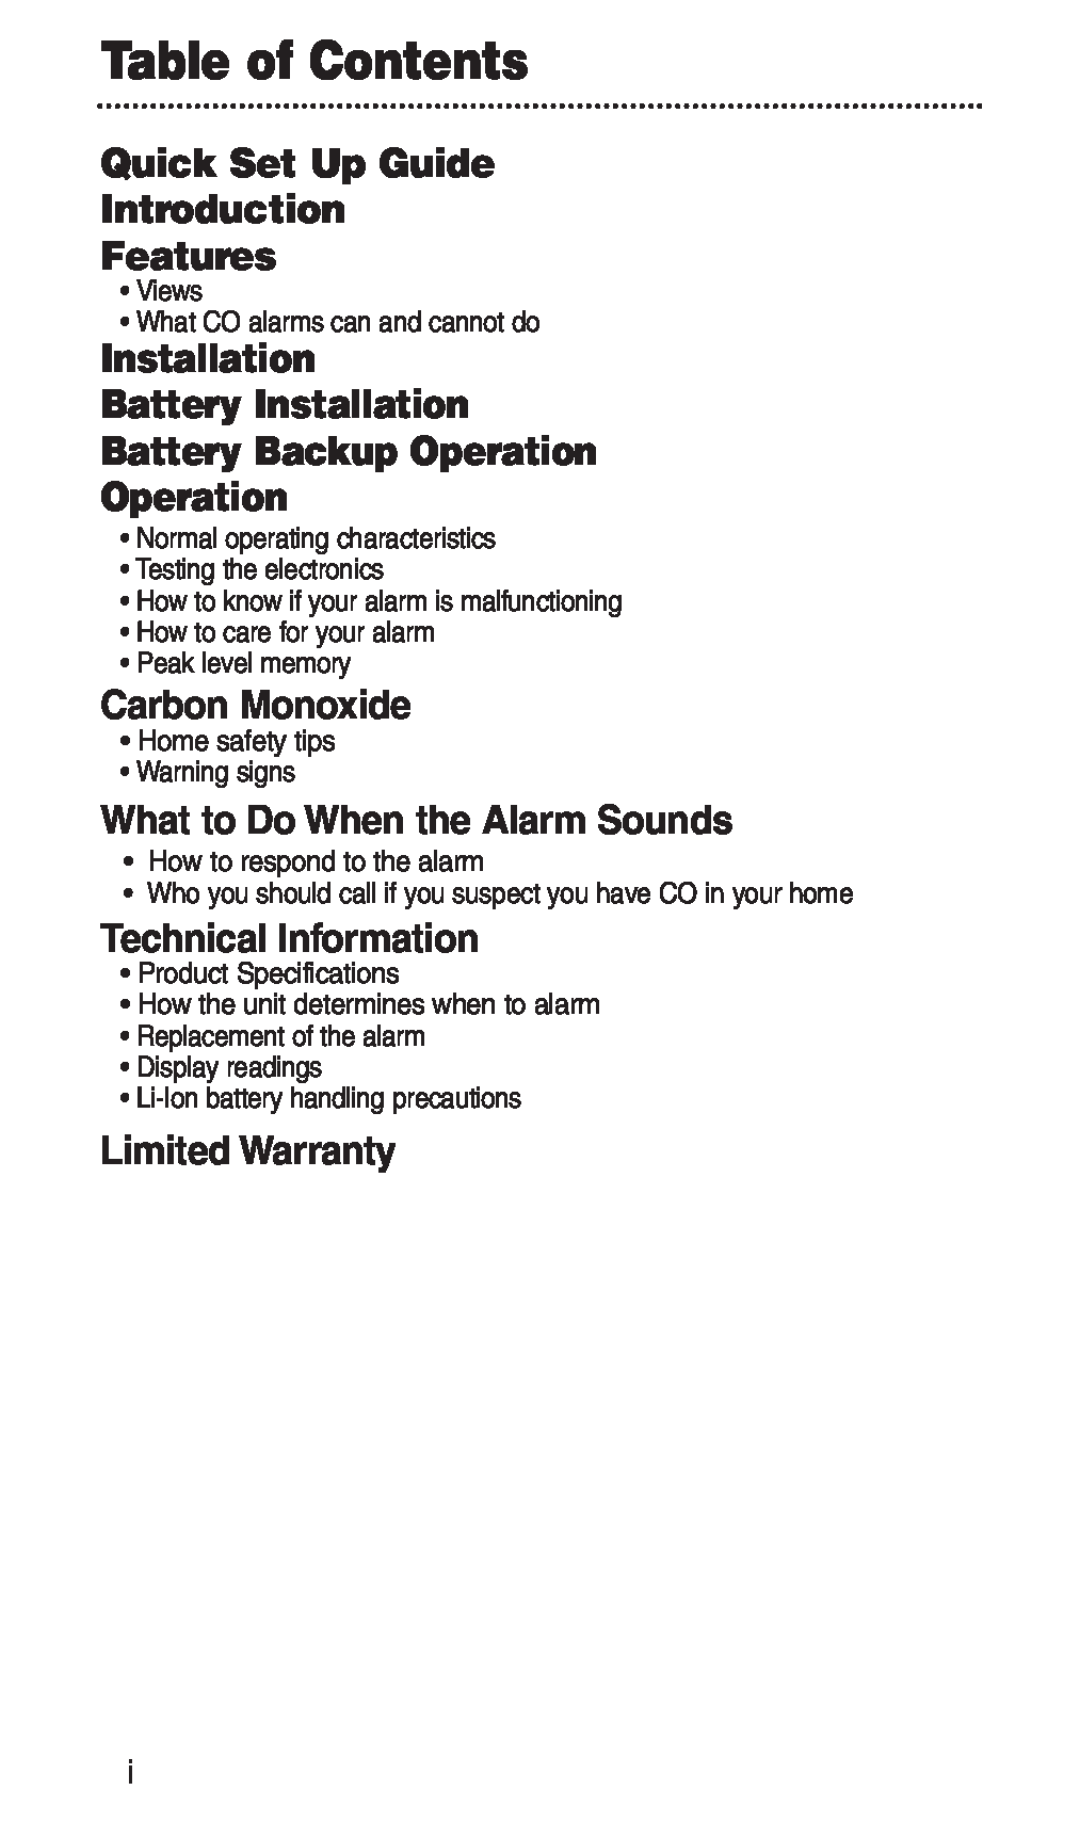 Kidde KN-COPP-3-RC manual Table of Contents, Quick Set Up Guide Introduction Features, Installation Battery Installation 